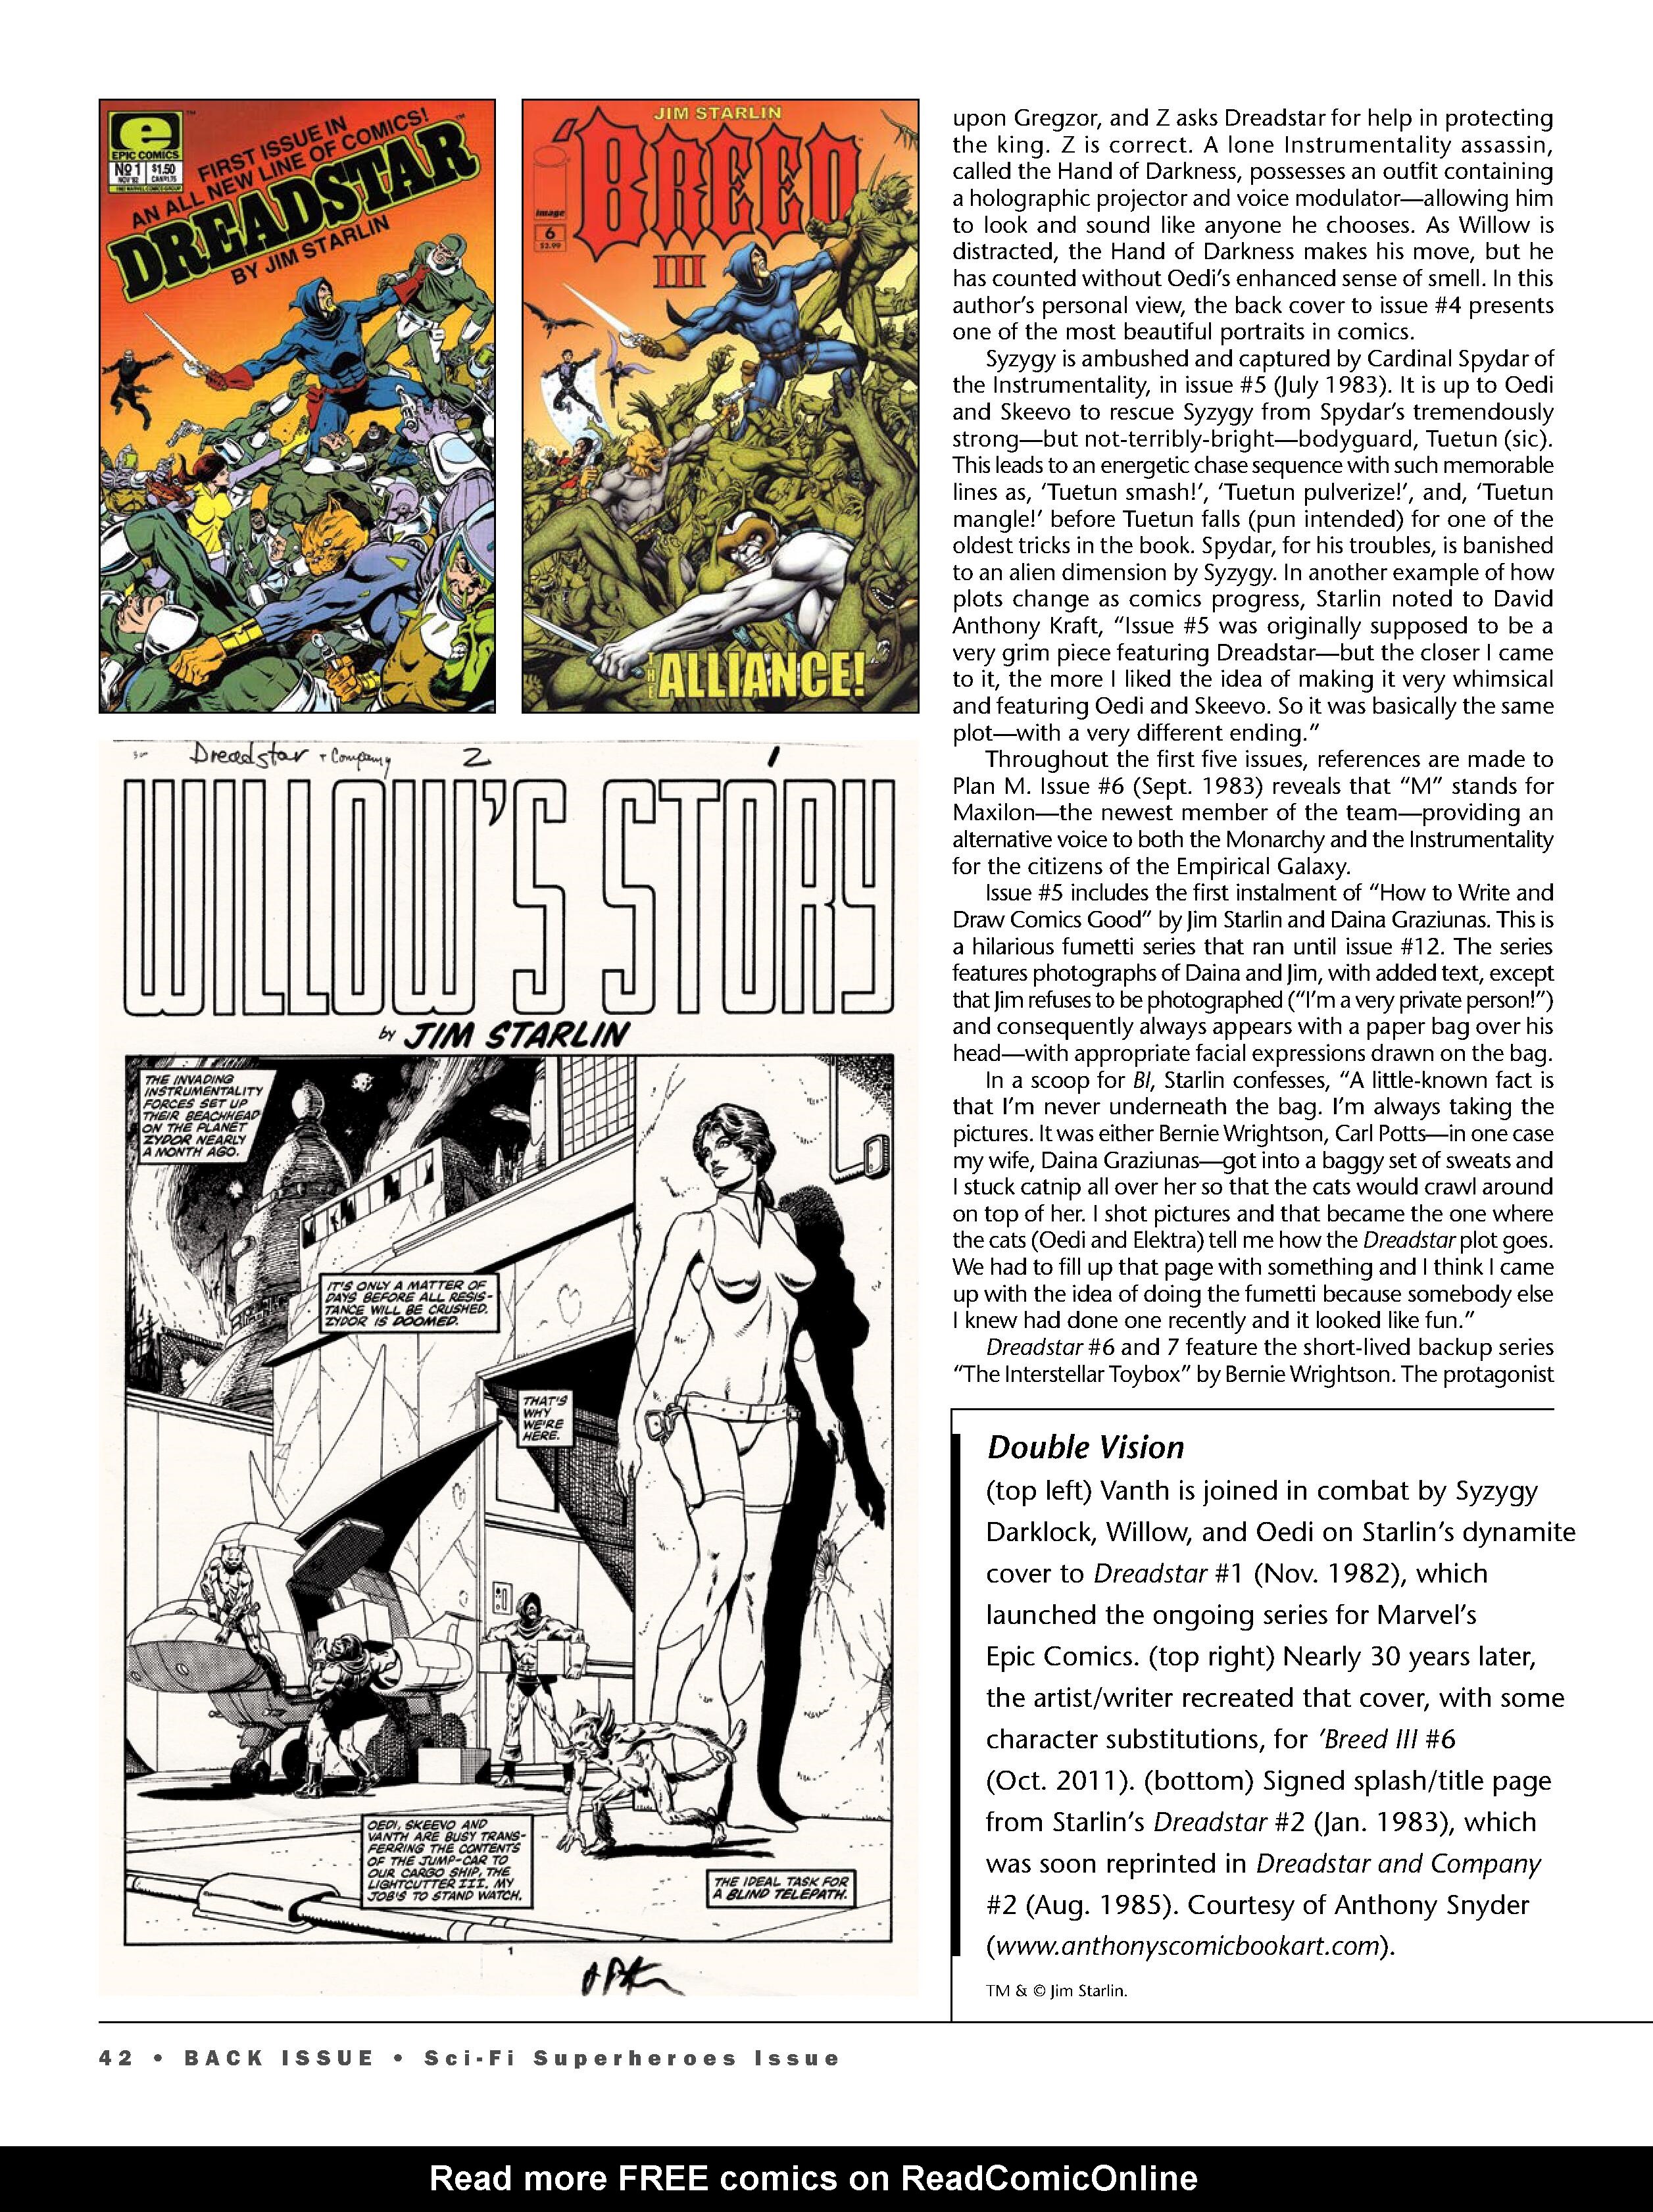 Read online Back Issue comic -  Issue #115 - 44